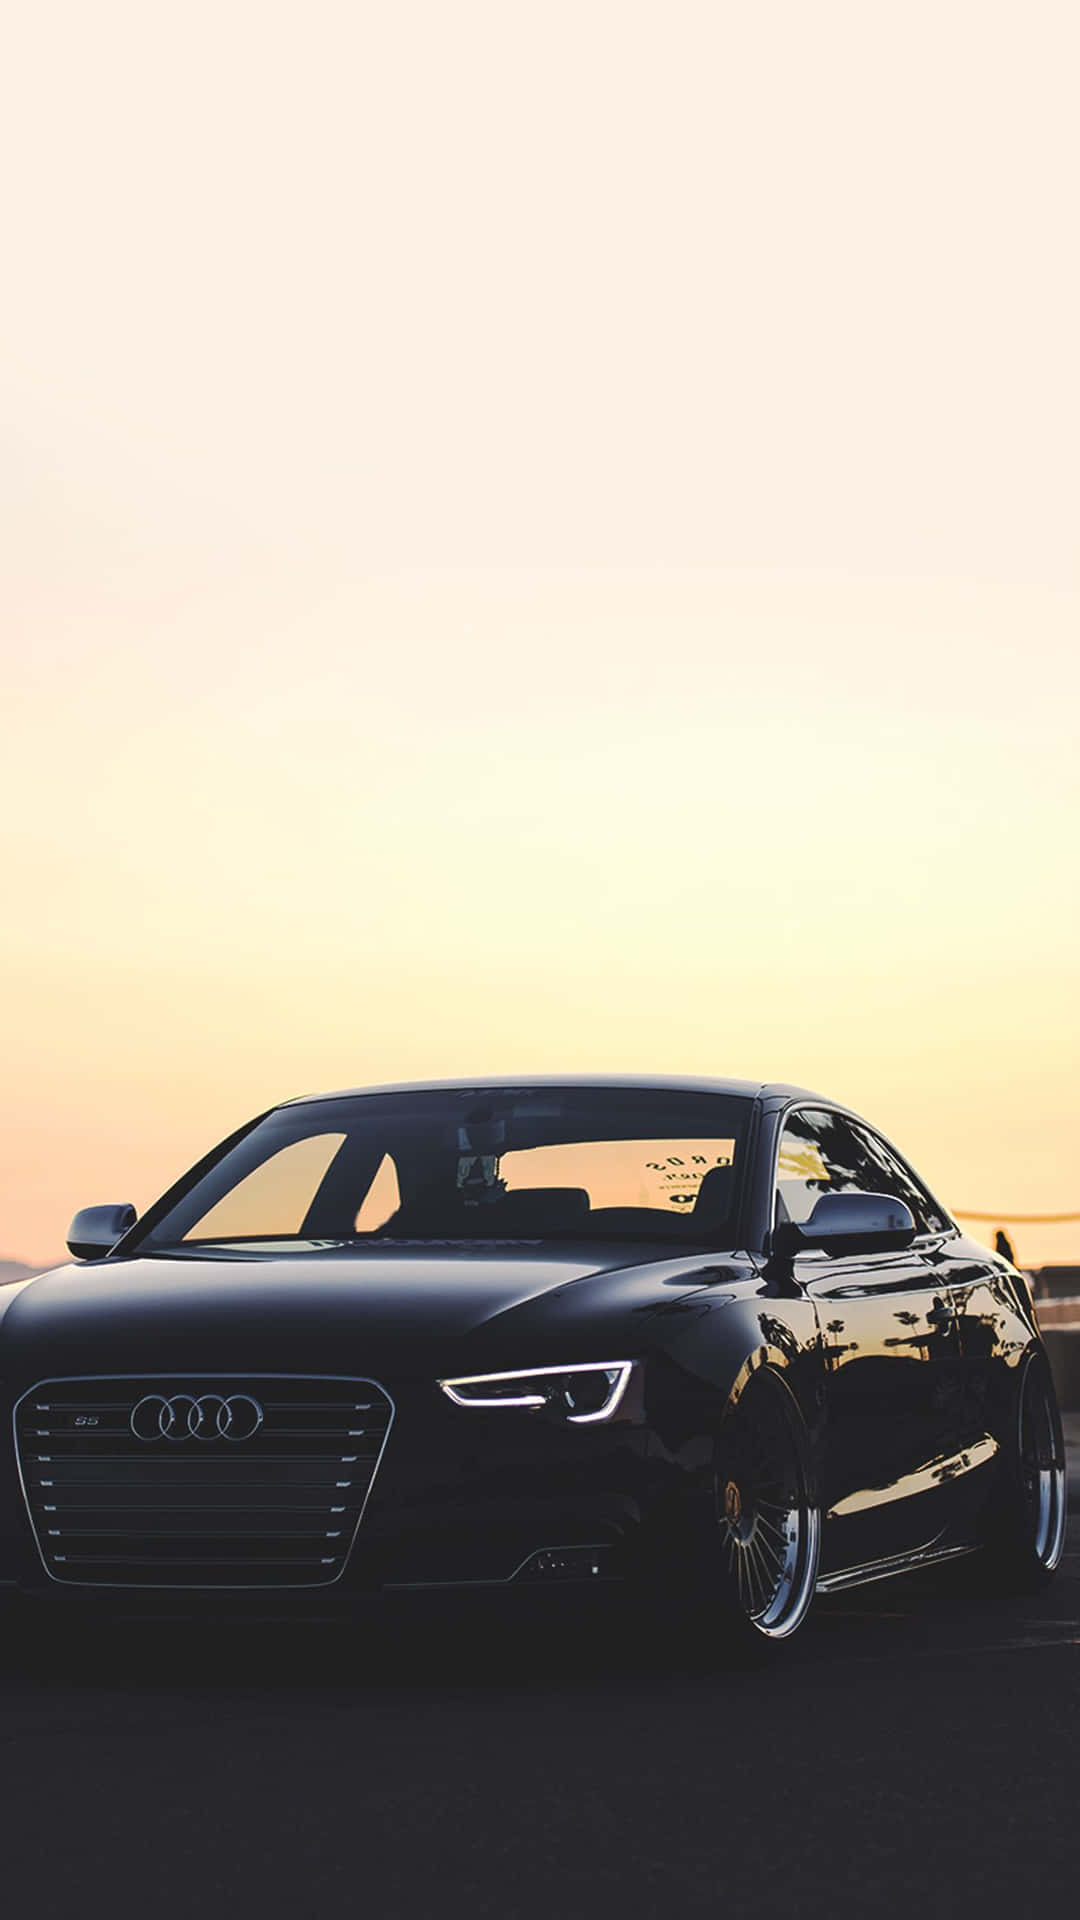 "Beautifully Designed Audi and Iphone Coming Together" Wallpaper